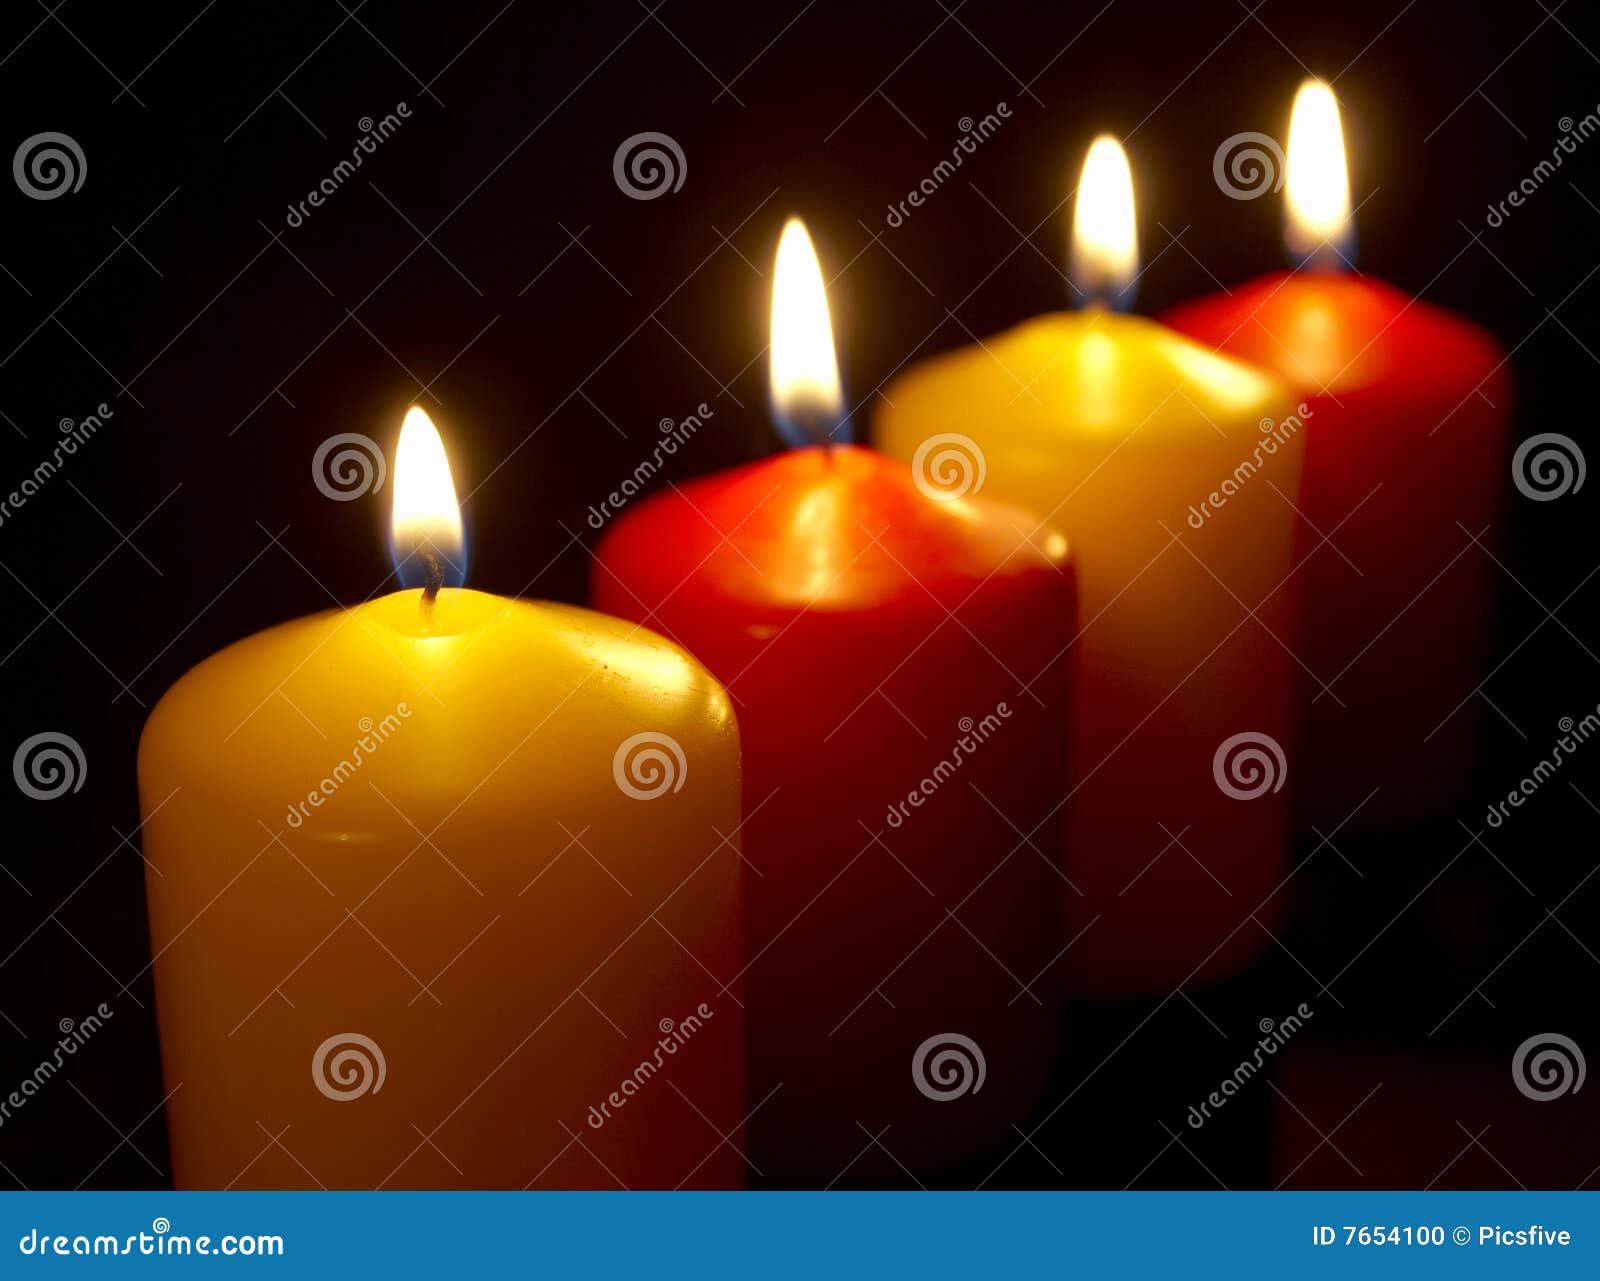 candles row